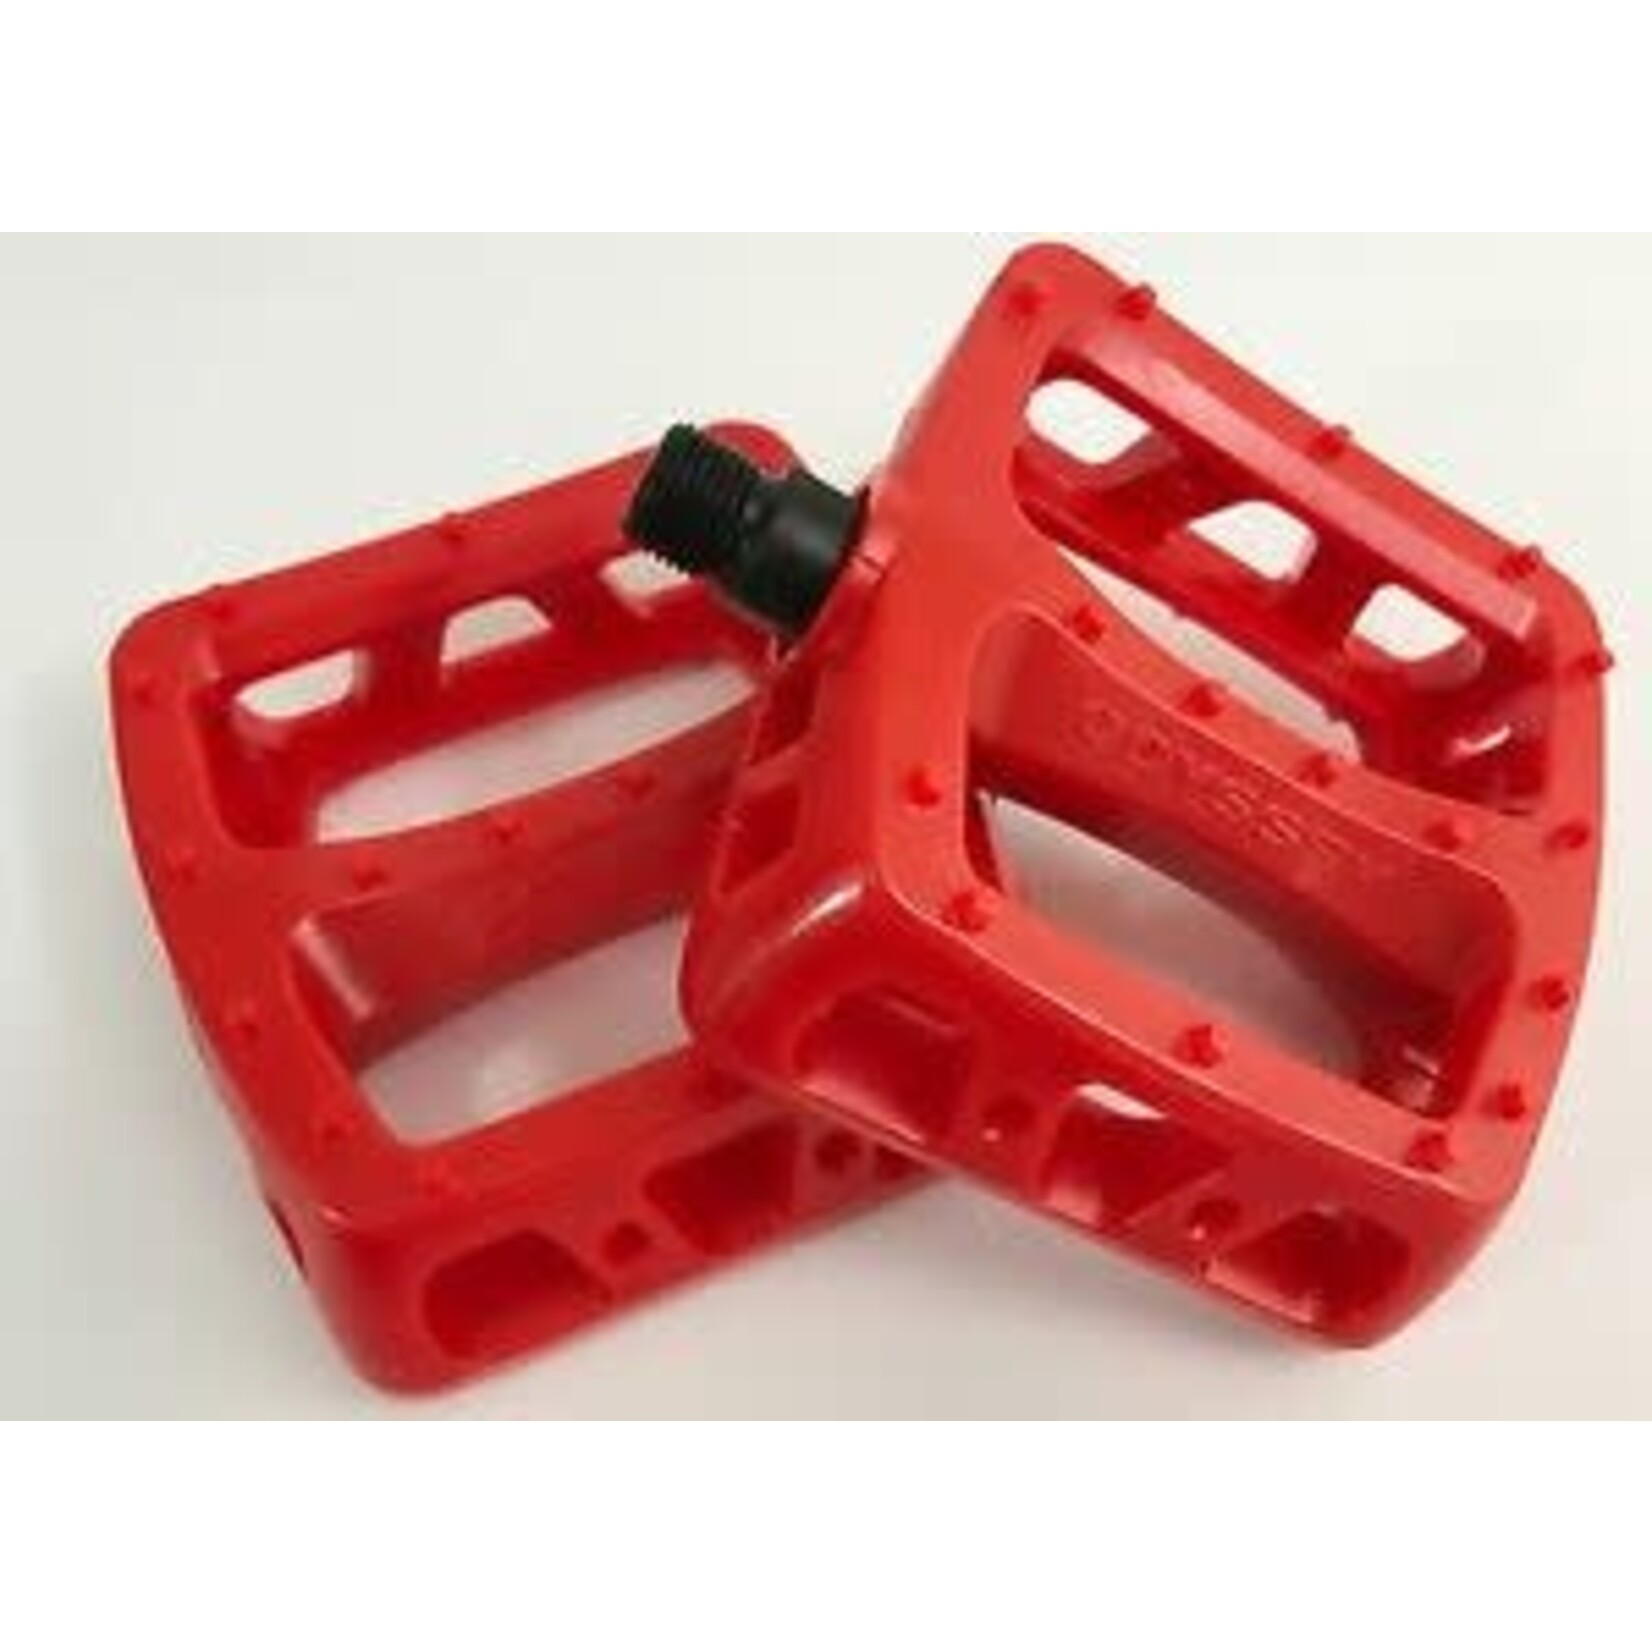 ODYSSEY TWISTED PEDAL PC 9/16